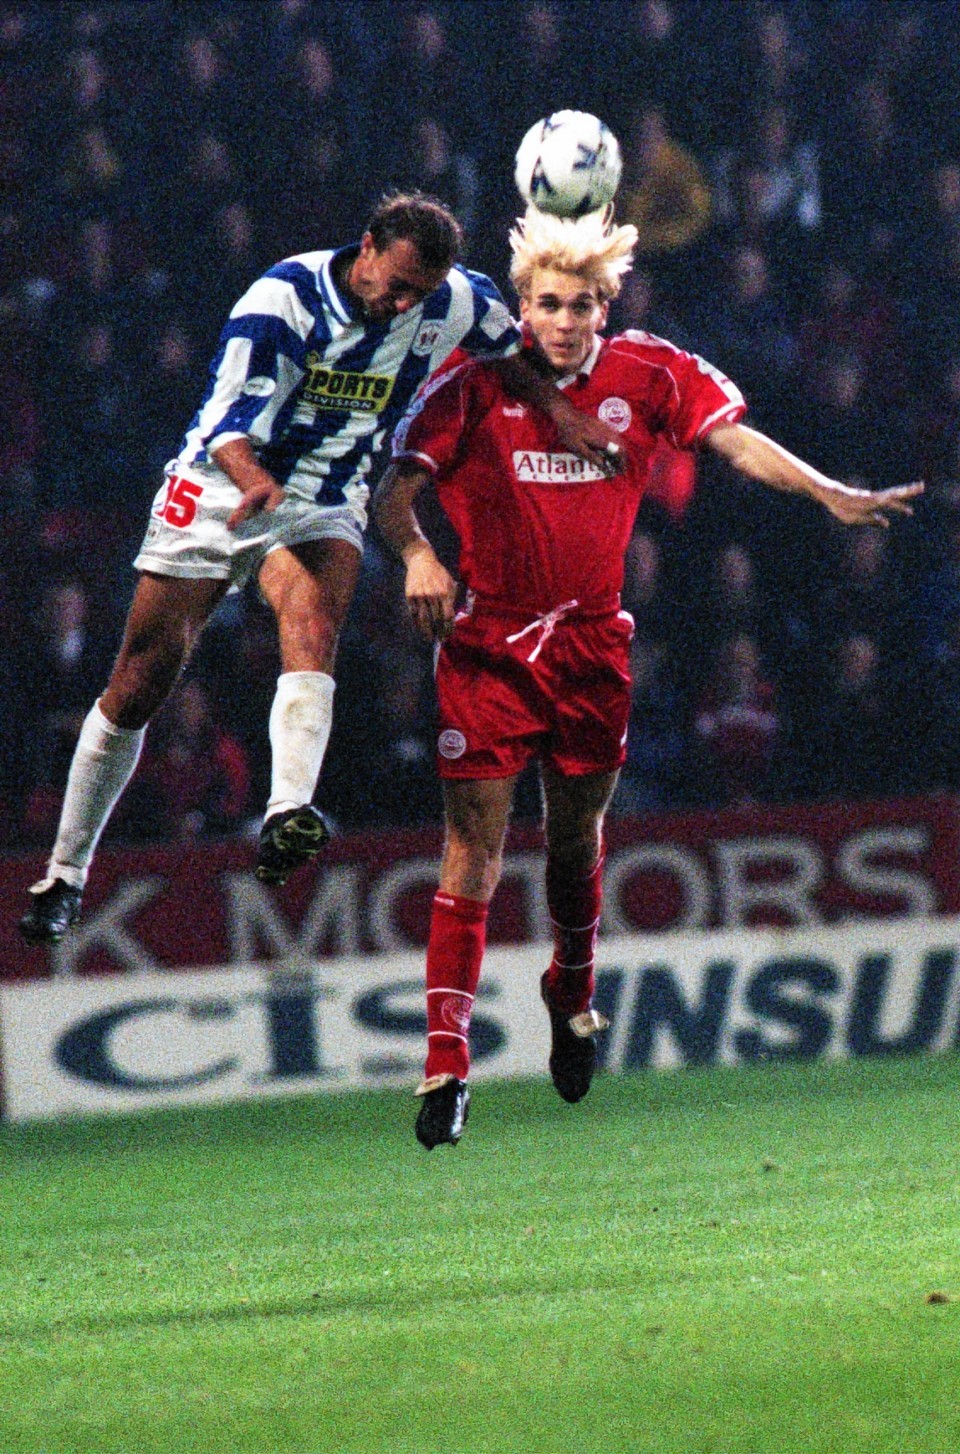 We stumbled across this beauty of Russell Anderson taking on Kilmarnock's Jerome Vareille in 1998 but the Dons captain will miss out today